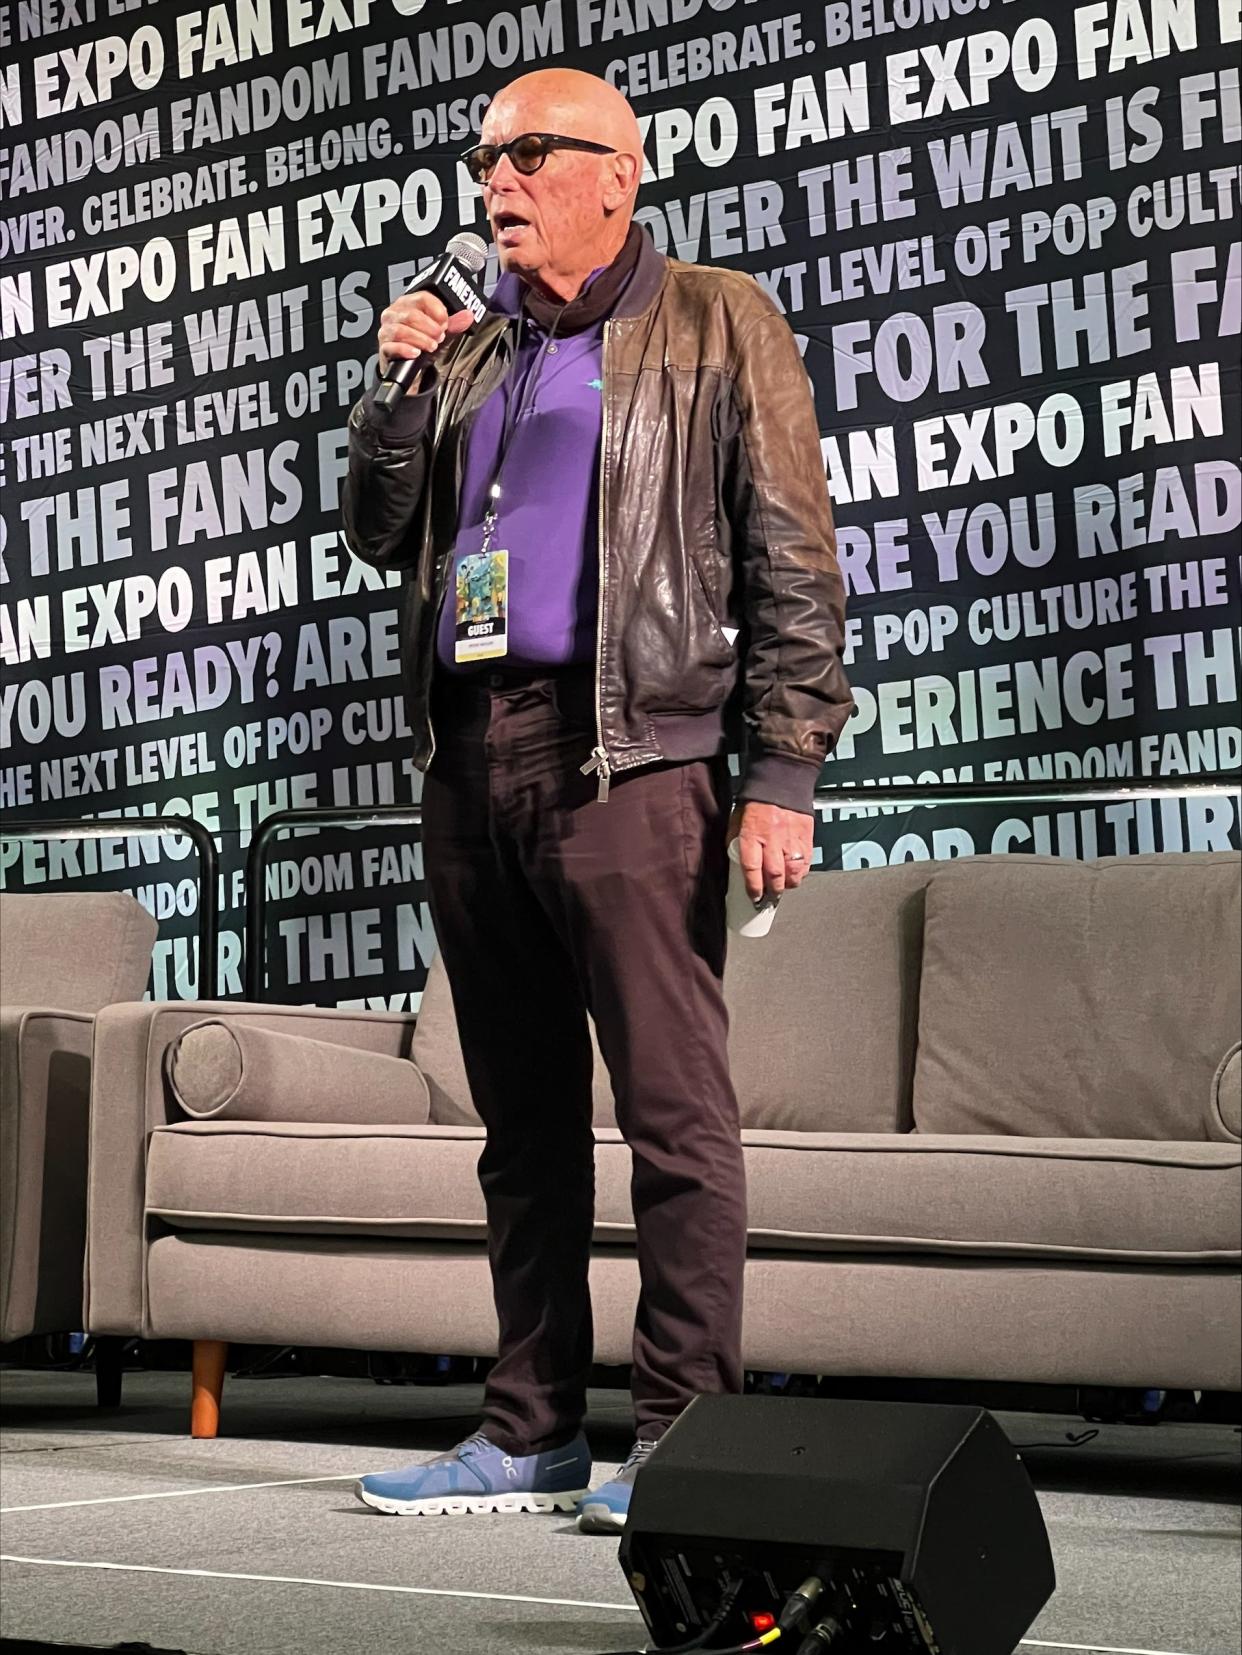 Peter Weller of "RoboCop" fame appeared at the 2023 Fan Expo Boston.